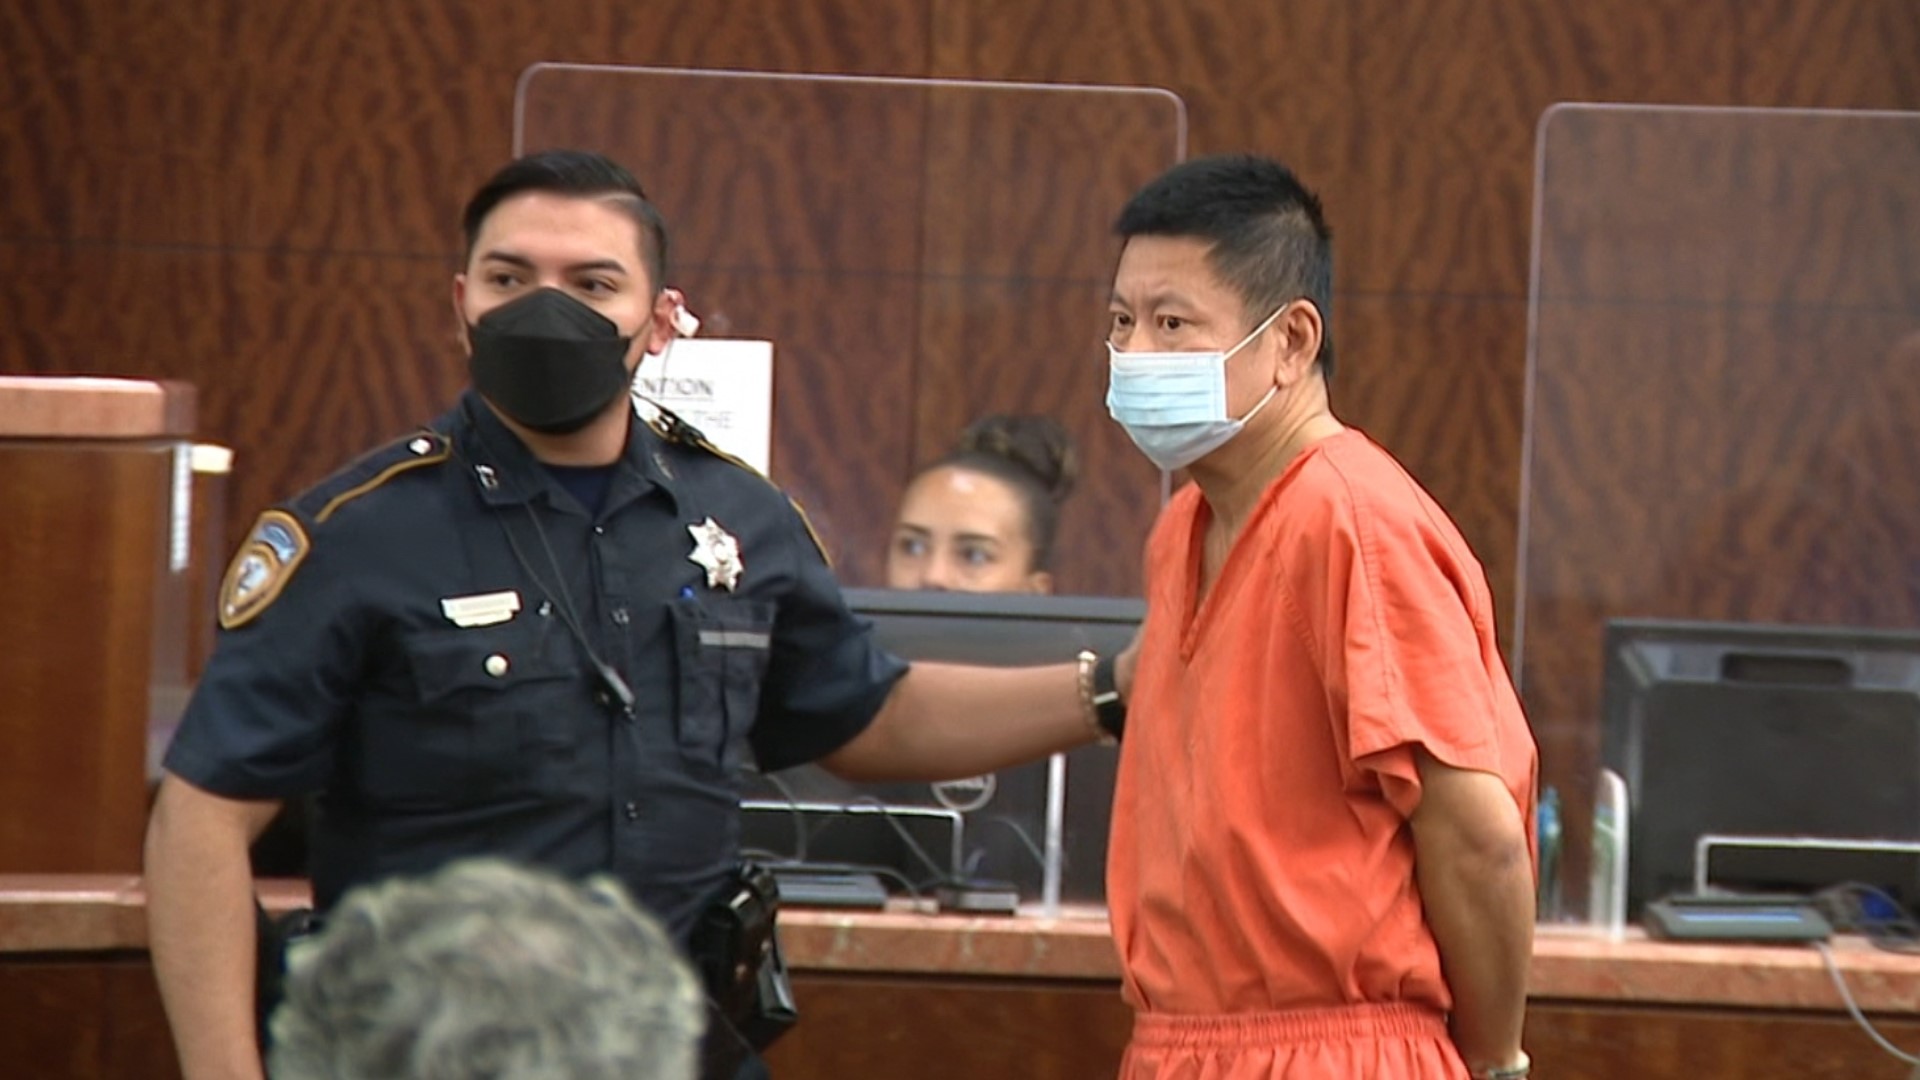 Feng Lu is charged with capital murder for the execution-style shooting deaths of  50-year-old Maoye Sun, 49-year-old Mei Xie, and their sons, ages 7 and 9.